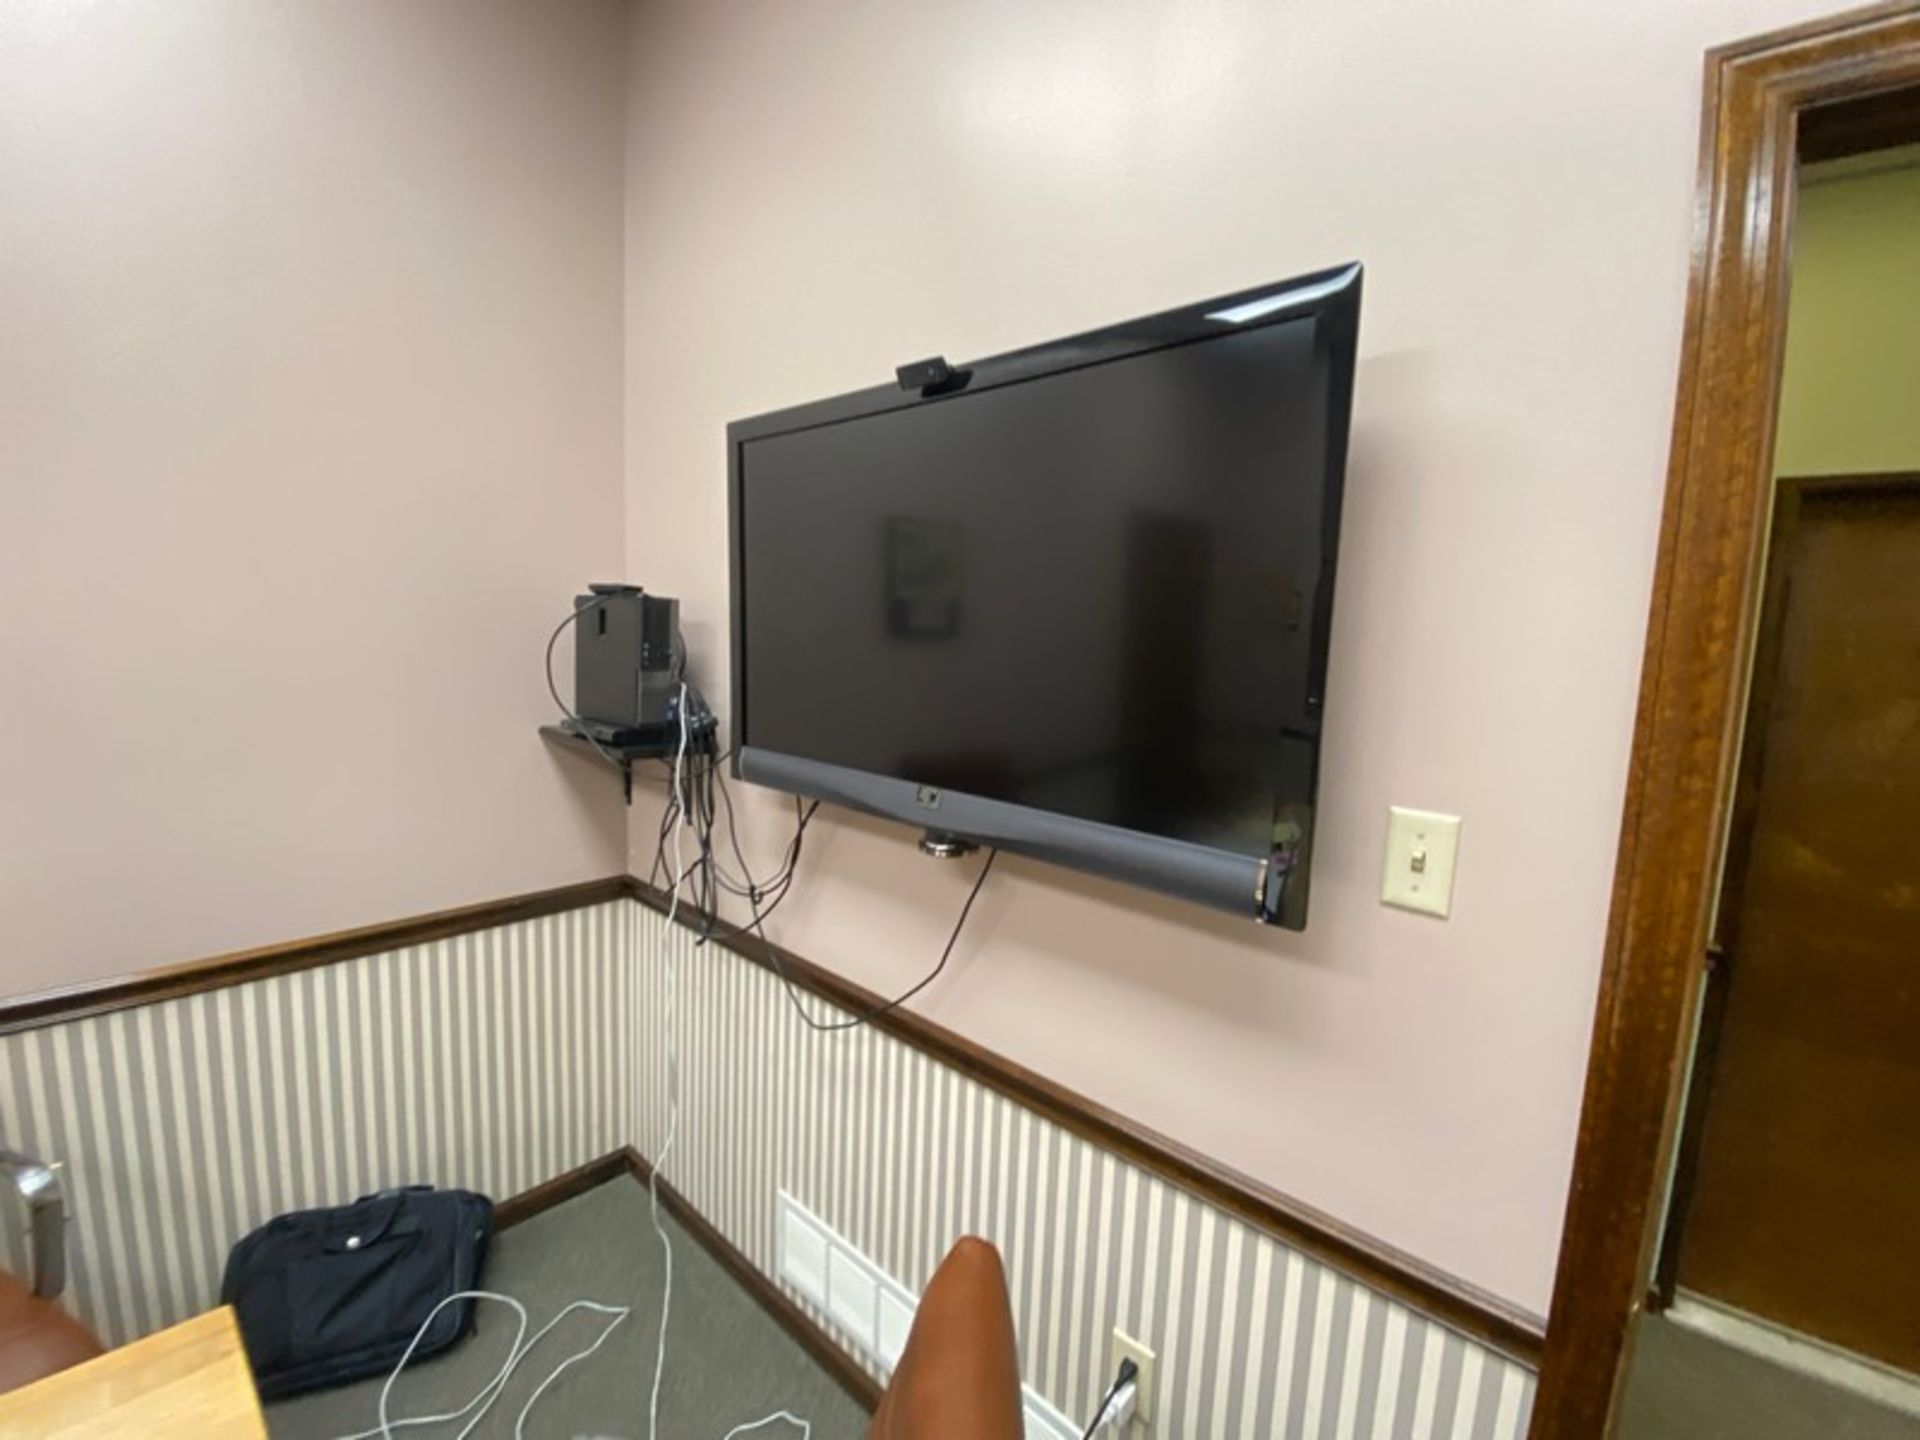 CONTENTS OF CONFERENCE ROOM, INCLUDES TABLE, CHAIRS, WALL MOUNTED TV, & SIDE UNIT (LOCATED IN CALLER - Image 3 of 3